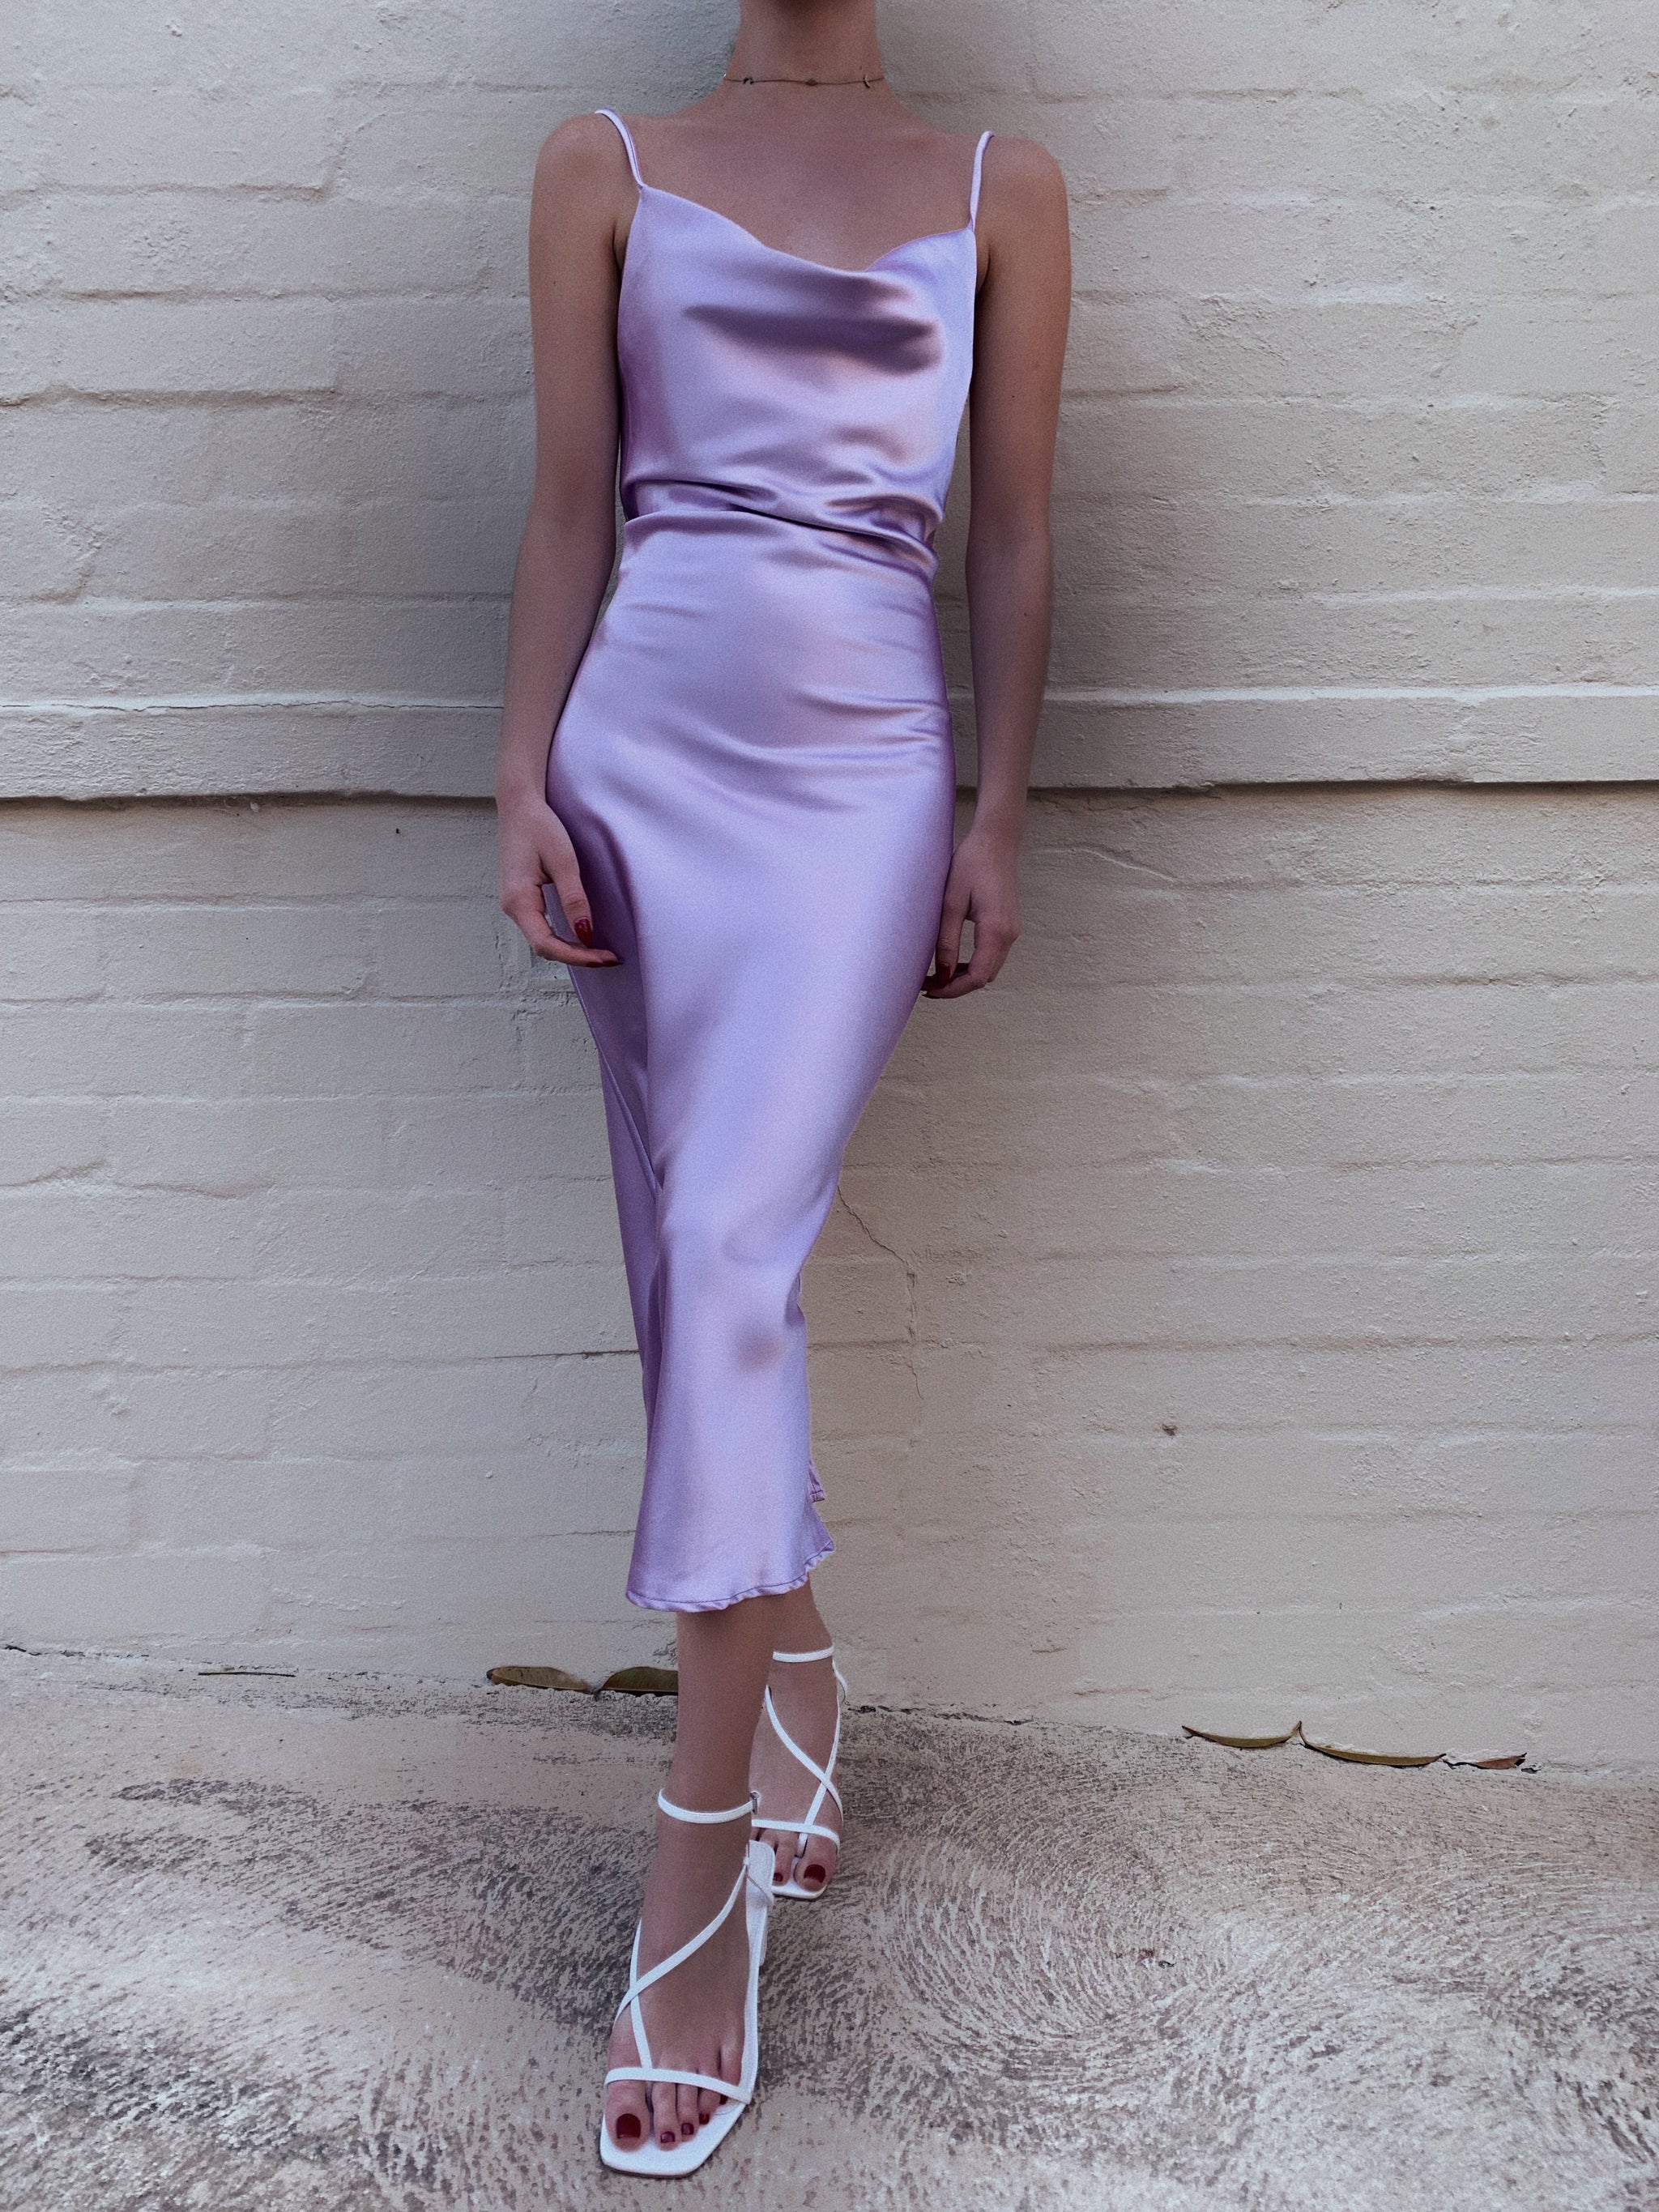 lilac dress and silver shoes